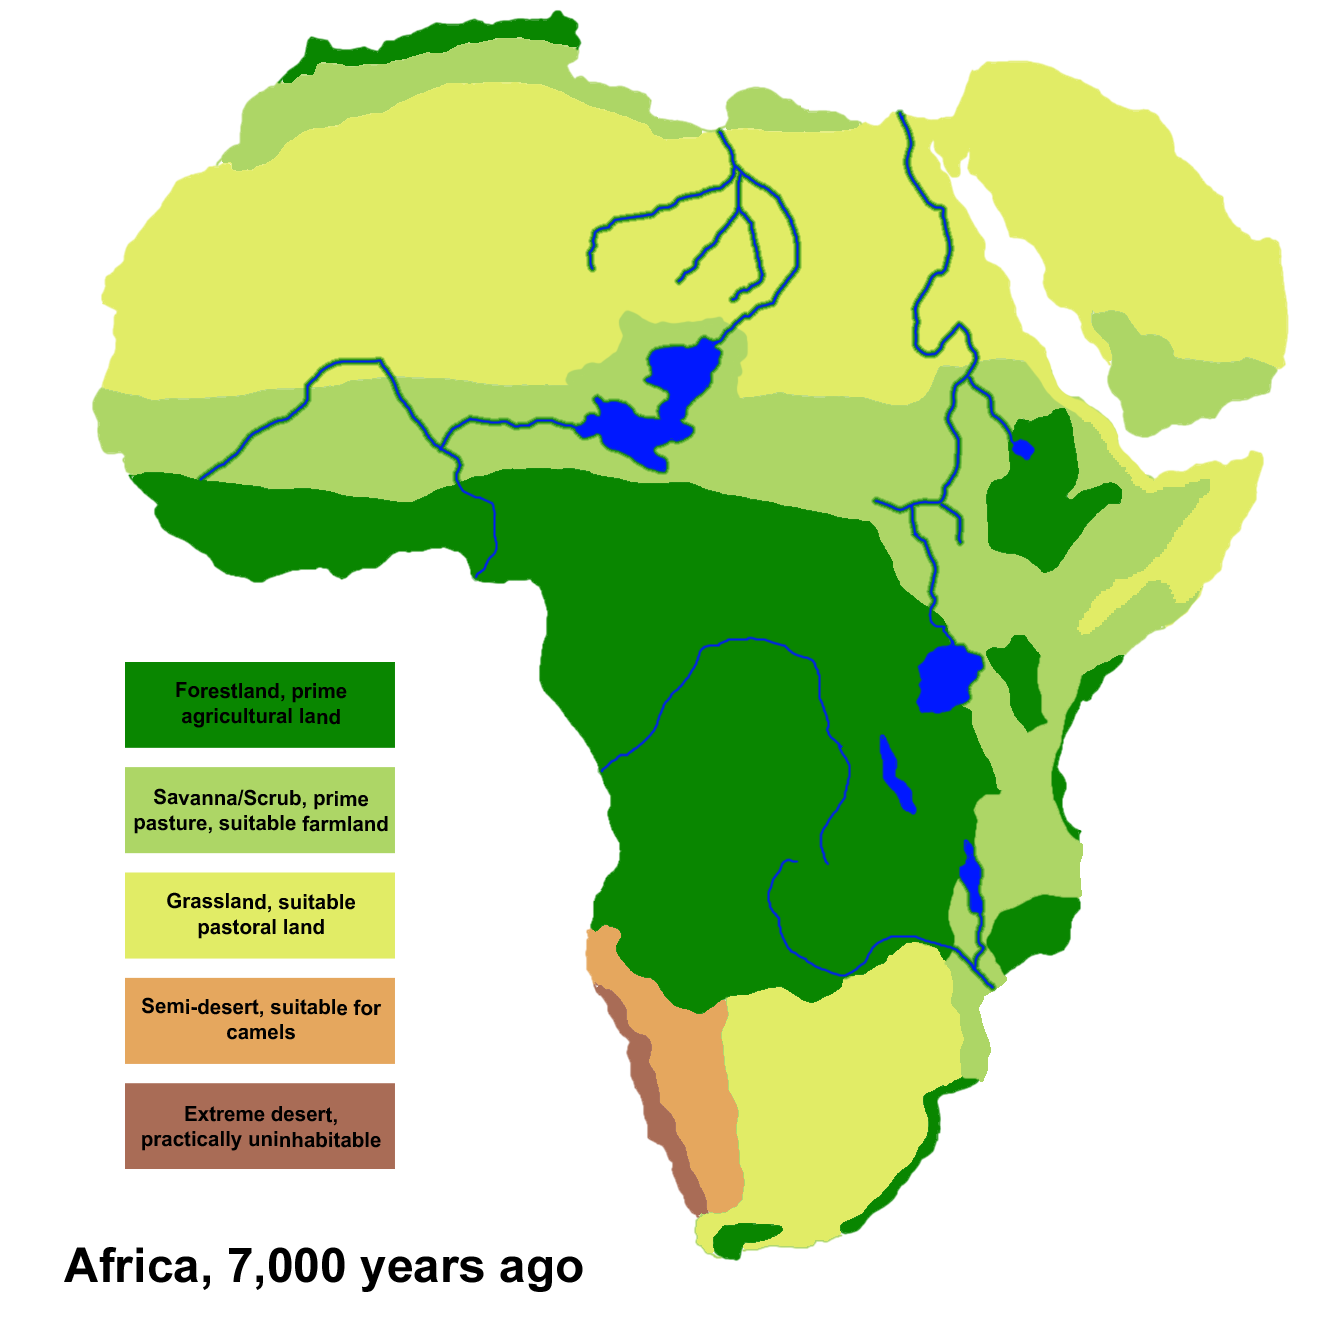 Africa_Climate_7000bp.png